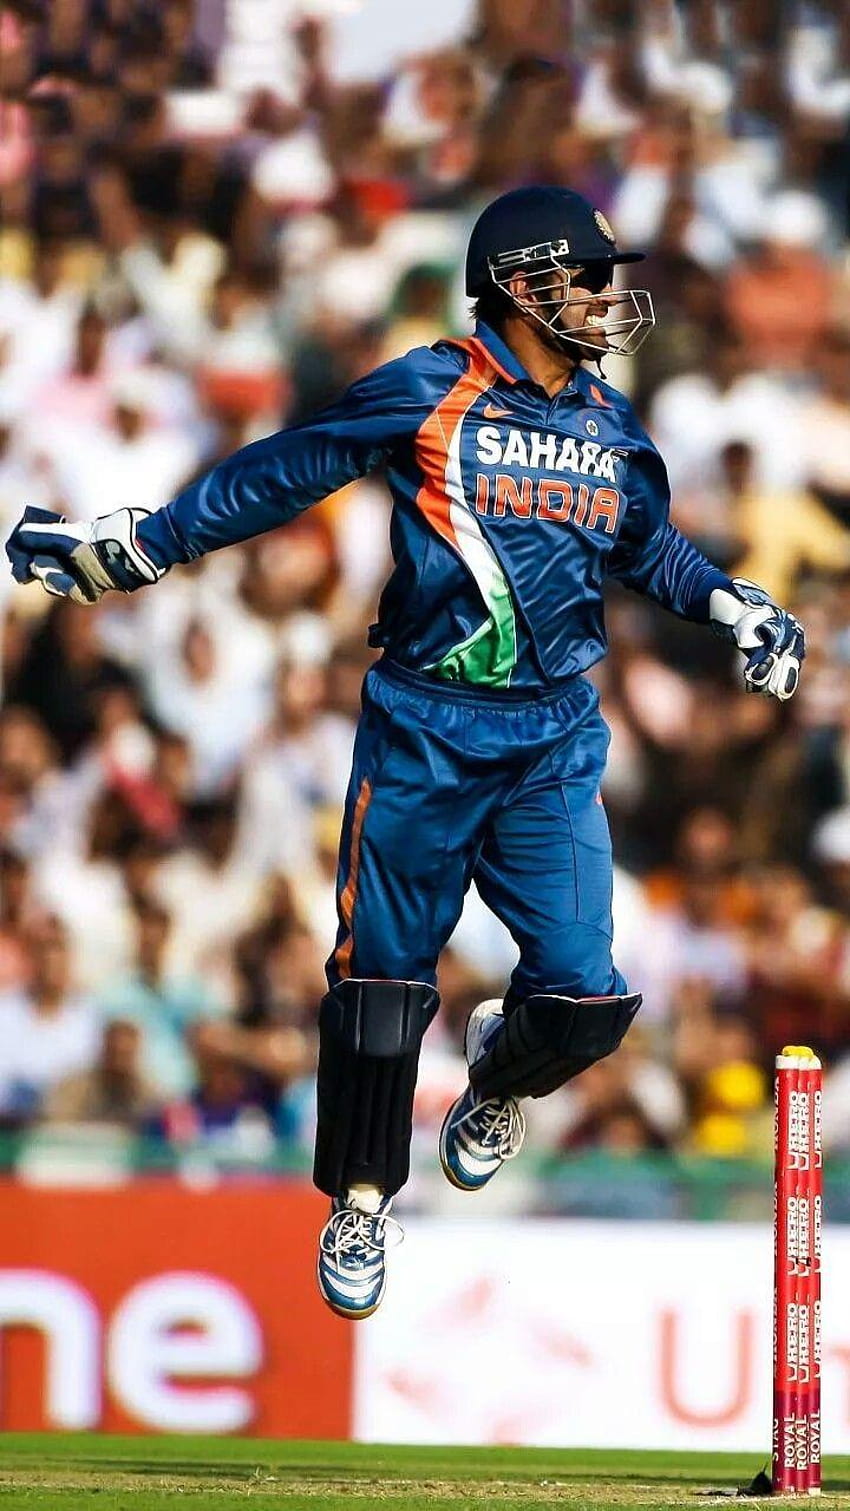 dhoni hd phone wallpaper for android and ios  Hd phone wallpapers Ms dhoni  photos Ab de villiers photo